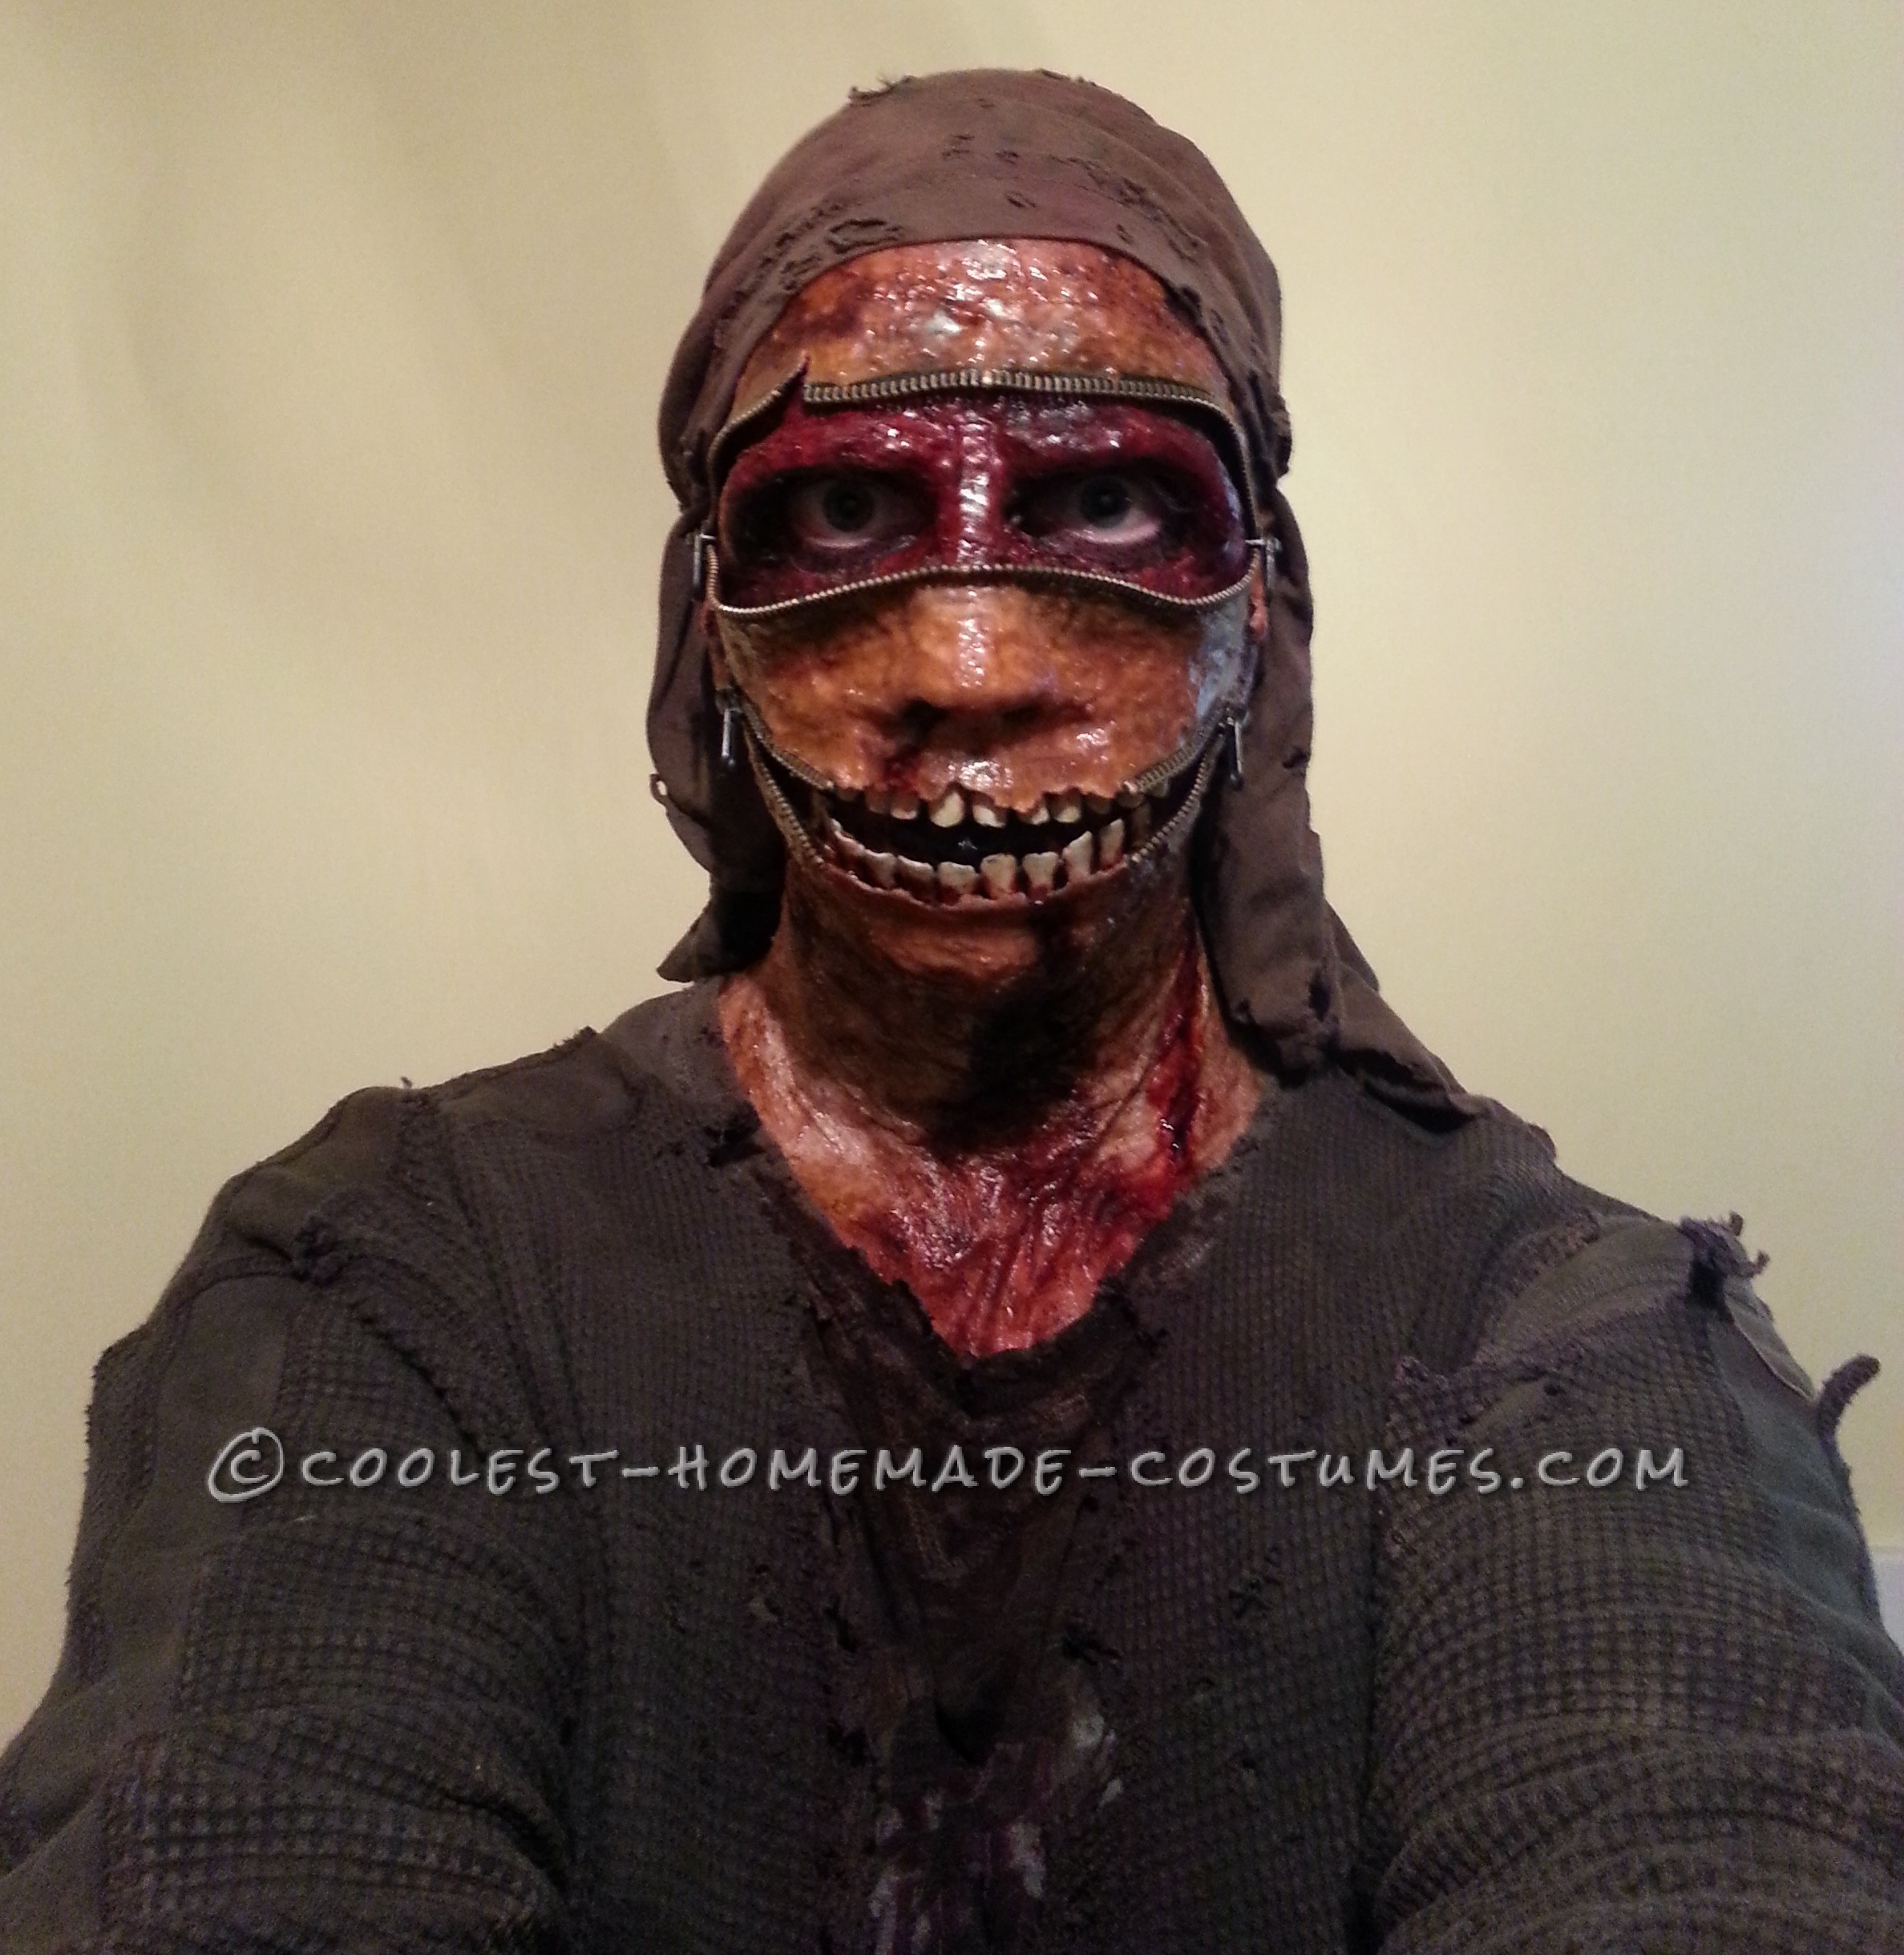 Homemade Zombie Zipper Costume That'll Freak You Out!